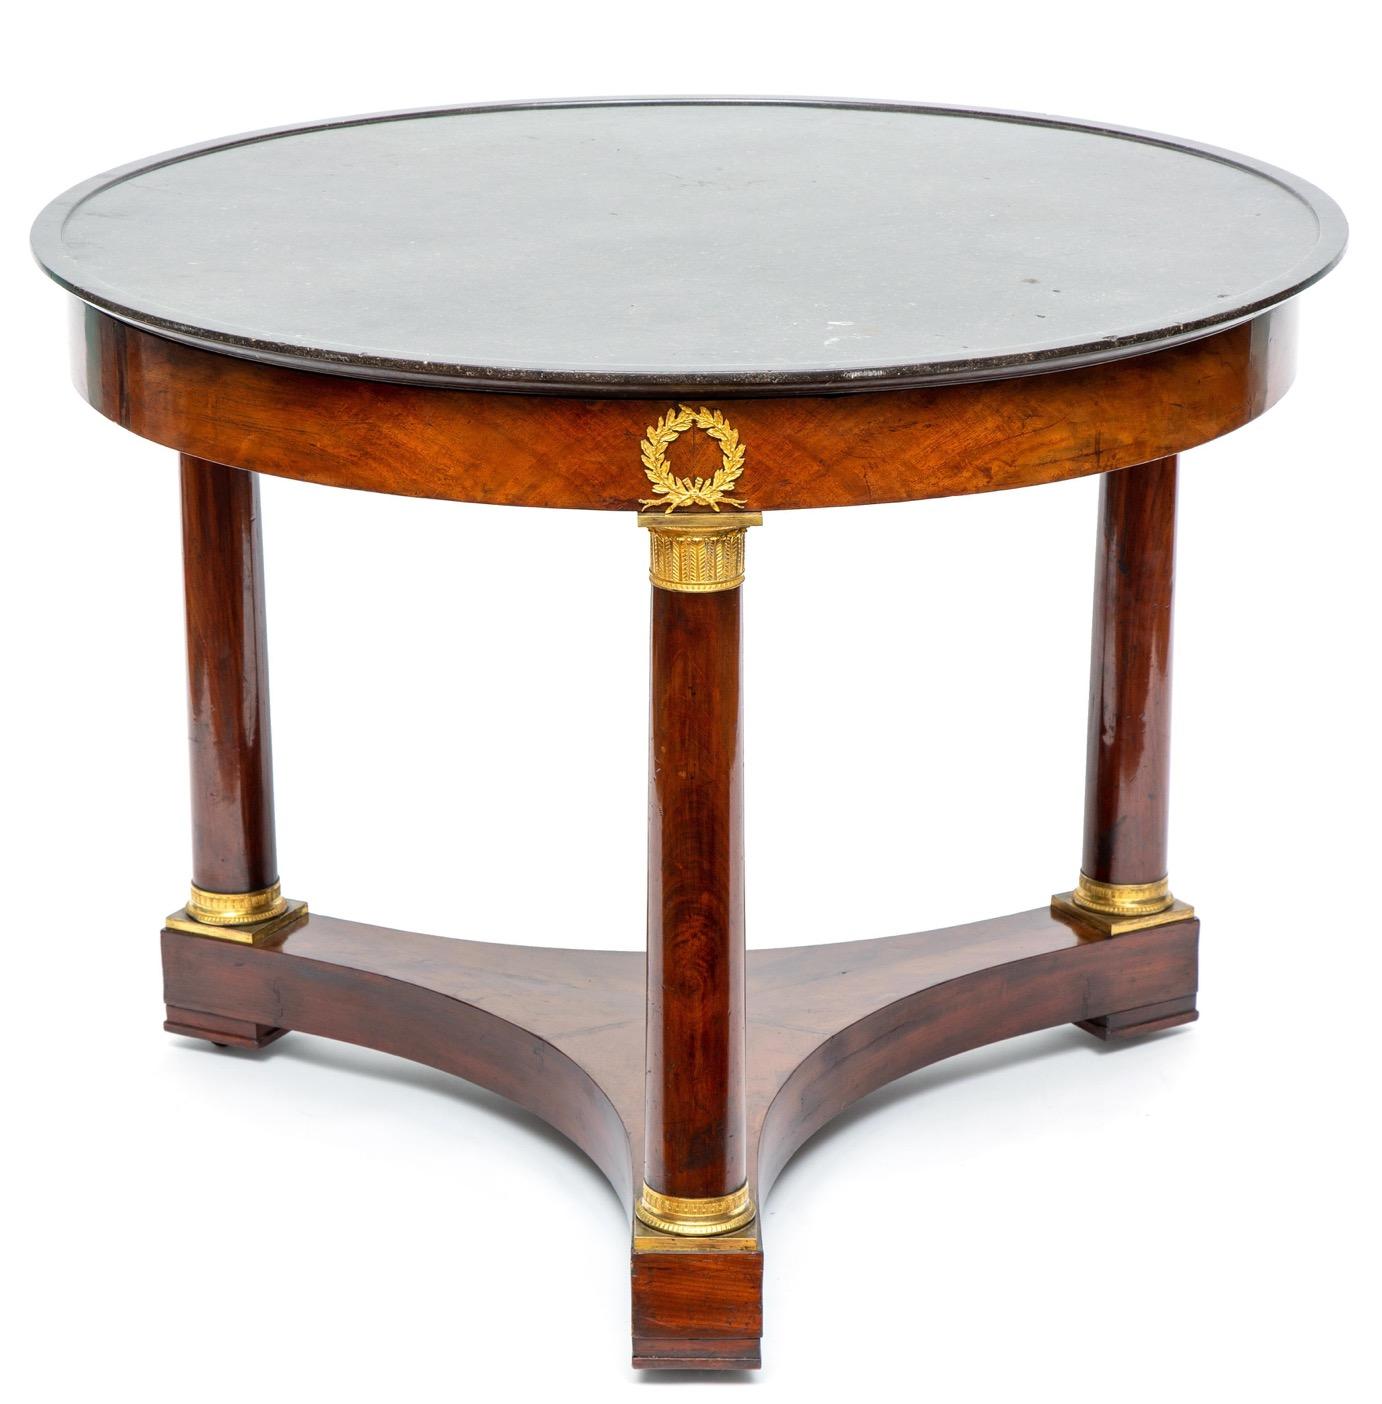 A very nice mahogany empire gueridon or center table with gilt bronze mounts and a black marble top. The marble top sculptured with a raised outer rim. The top frame is hold up by three gilt bronze mounted mahogany columns that rest on a tripod